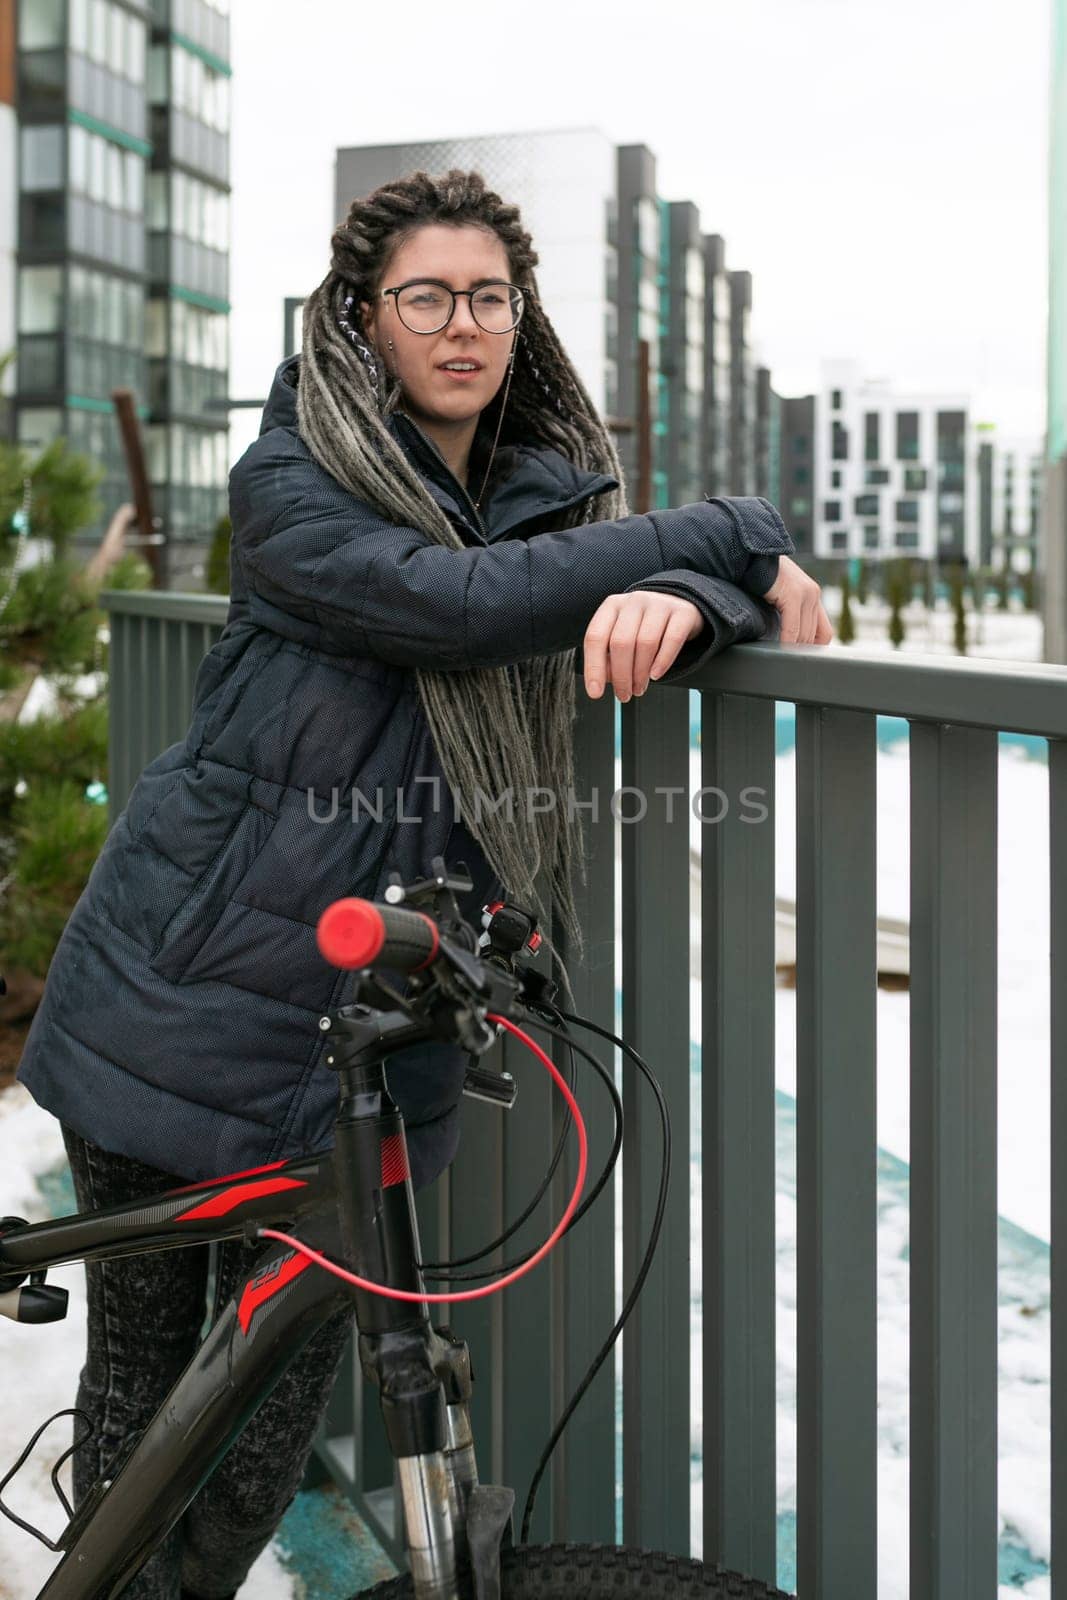 A pretty young woman with a dreadlocked hairstyle rides a rented bicycle.